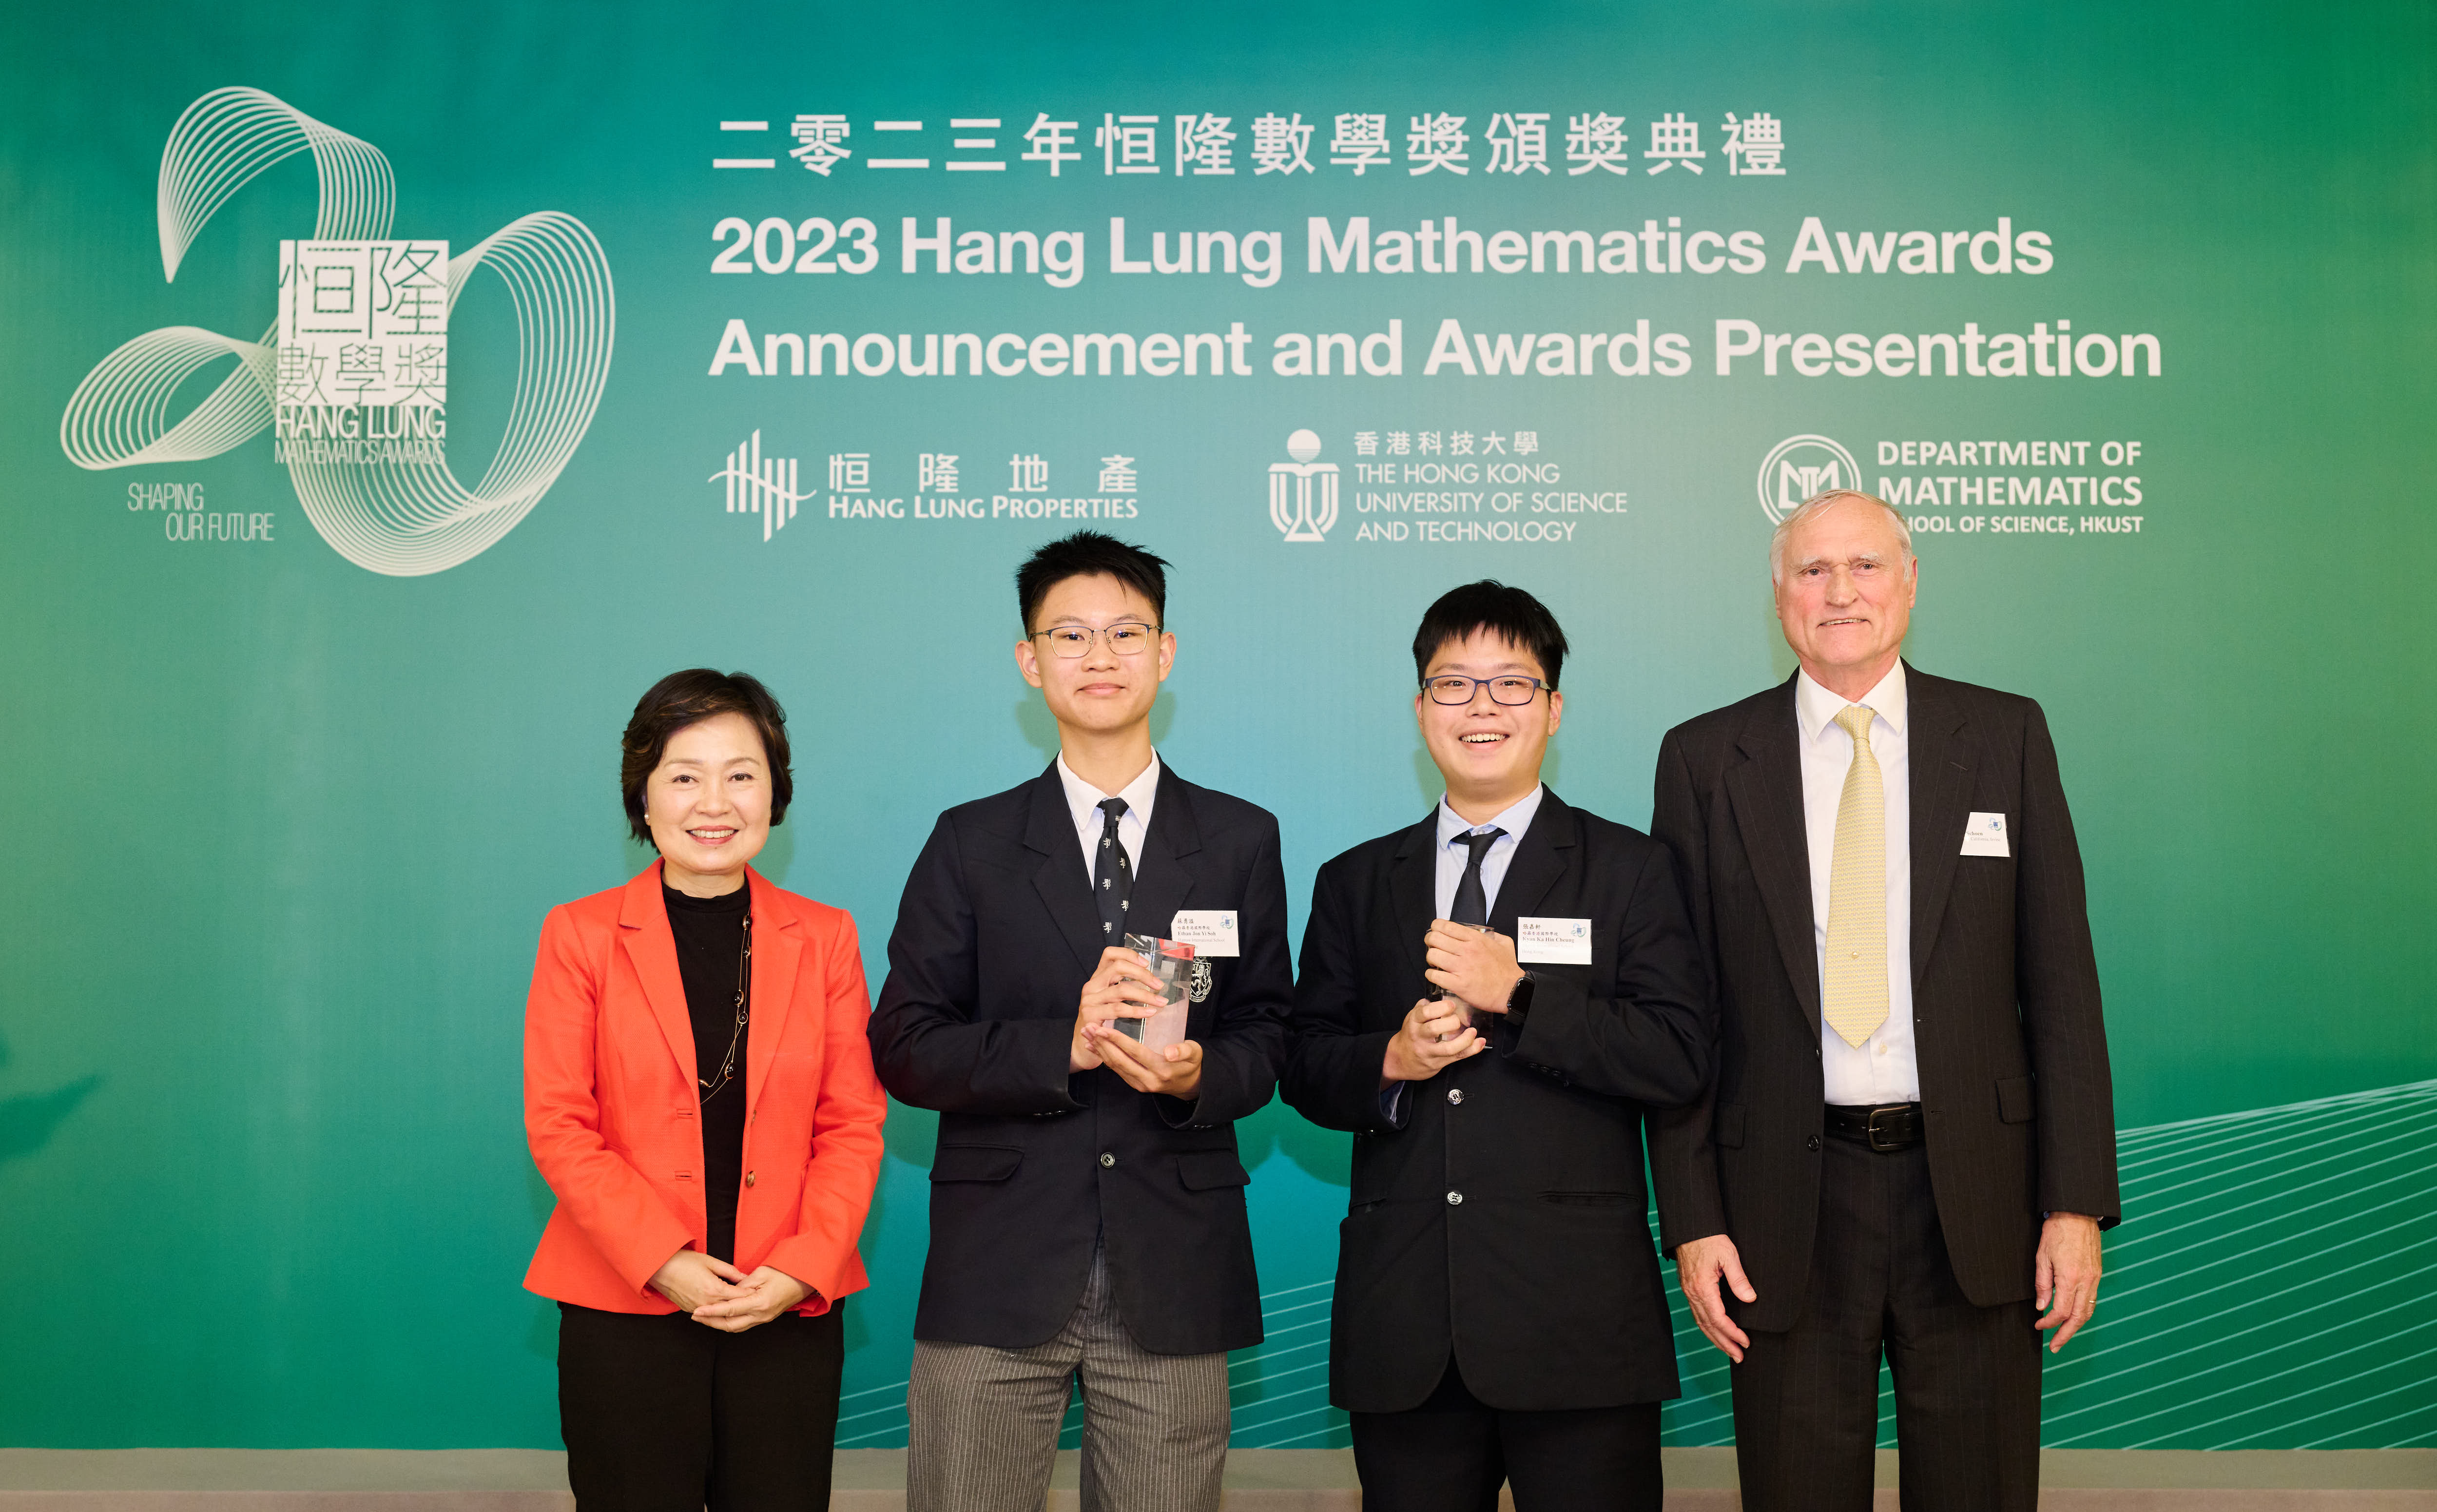 Dr. Christine CHOI, Secretary for Education of the Hong Kong Special Administrative Region (left), and Prof. Richard SCHOEN, 2017 Wolf Prize Laureate in Mathematics and Chair of the 2023 HLMA Scientific Committee (right) with the 2023 Hang Lung Mathematics Awards Gold Award winners Kyan CHEUNG Ka-Hin and Ethan SOH Jon-Yi from Harrow International School Hong Kong. Their research title is “On the Properties of the Semigroup Generated by the RL Fractional Integral”